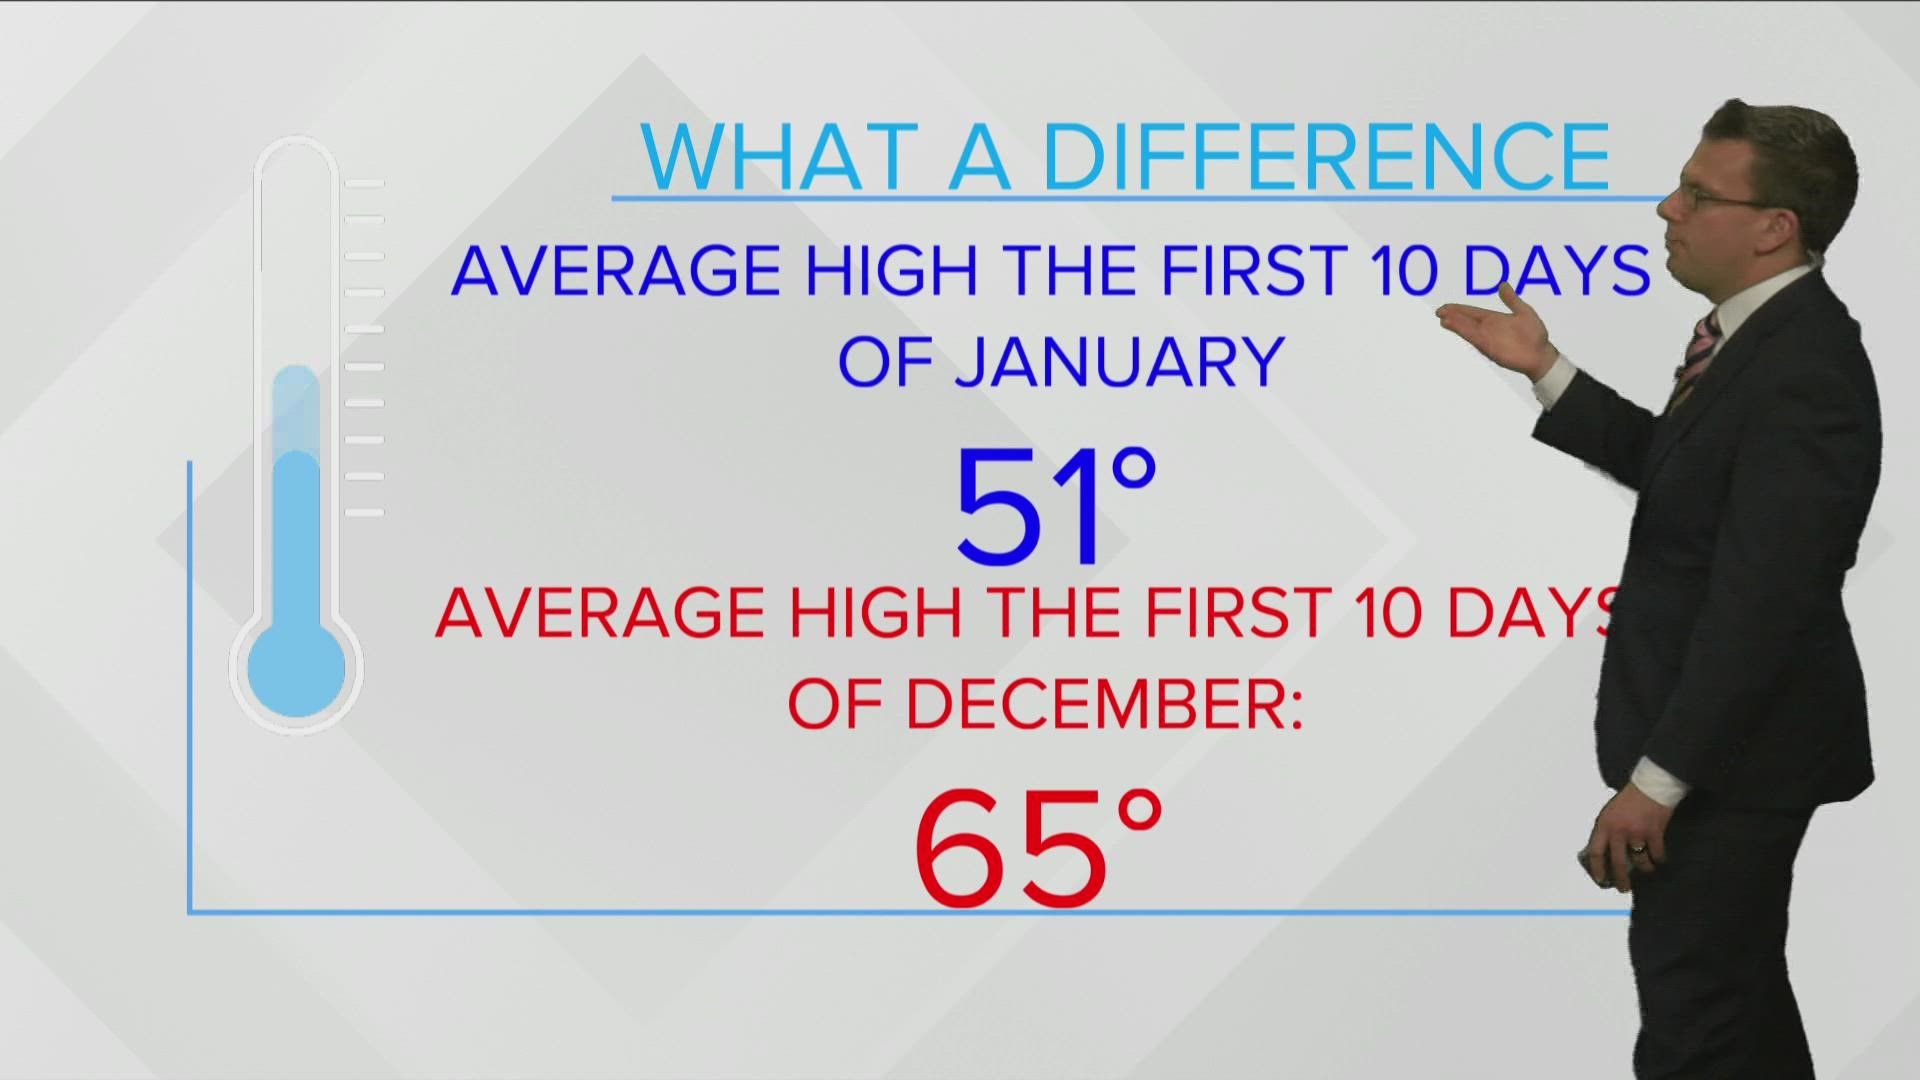 December started much warmer than January has